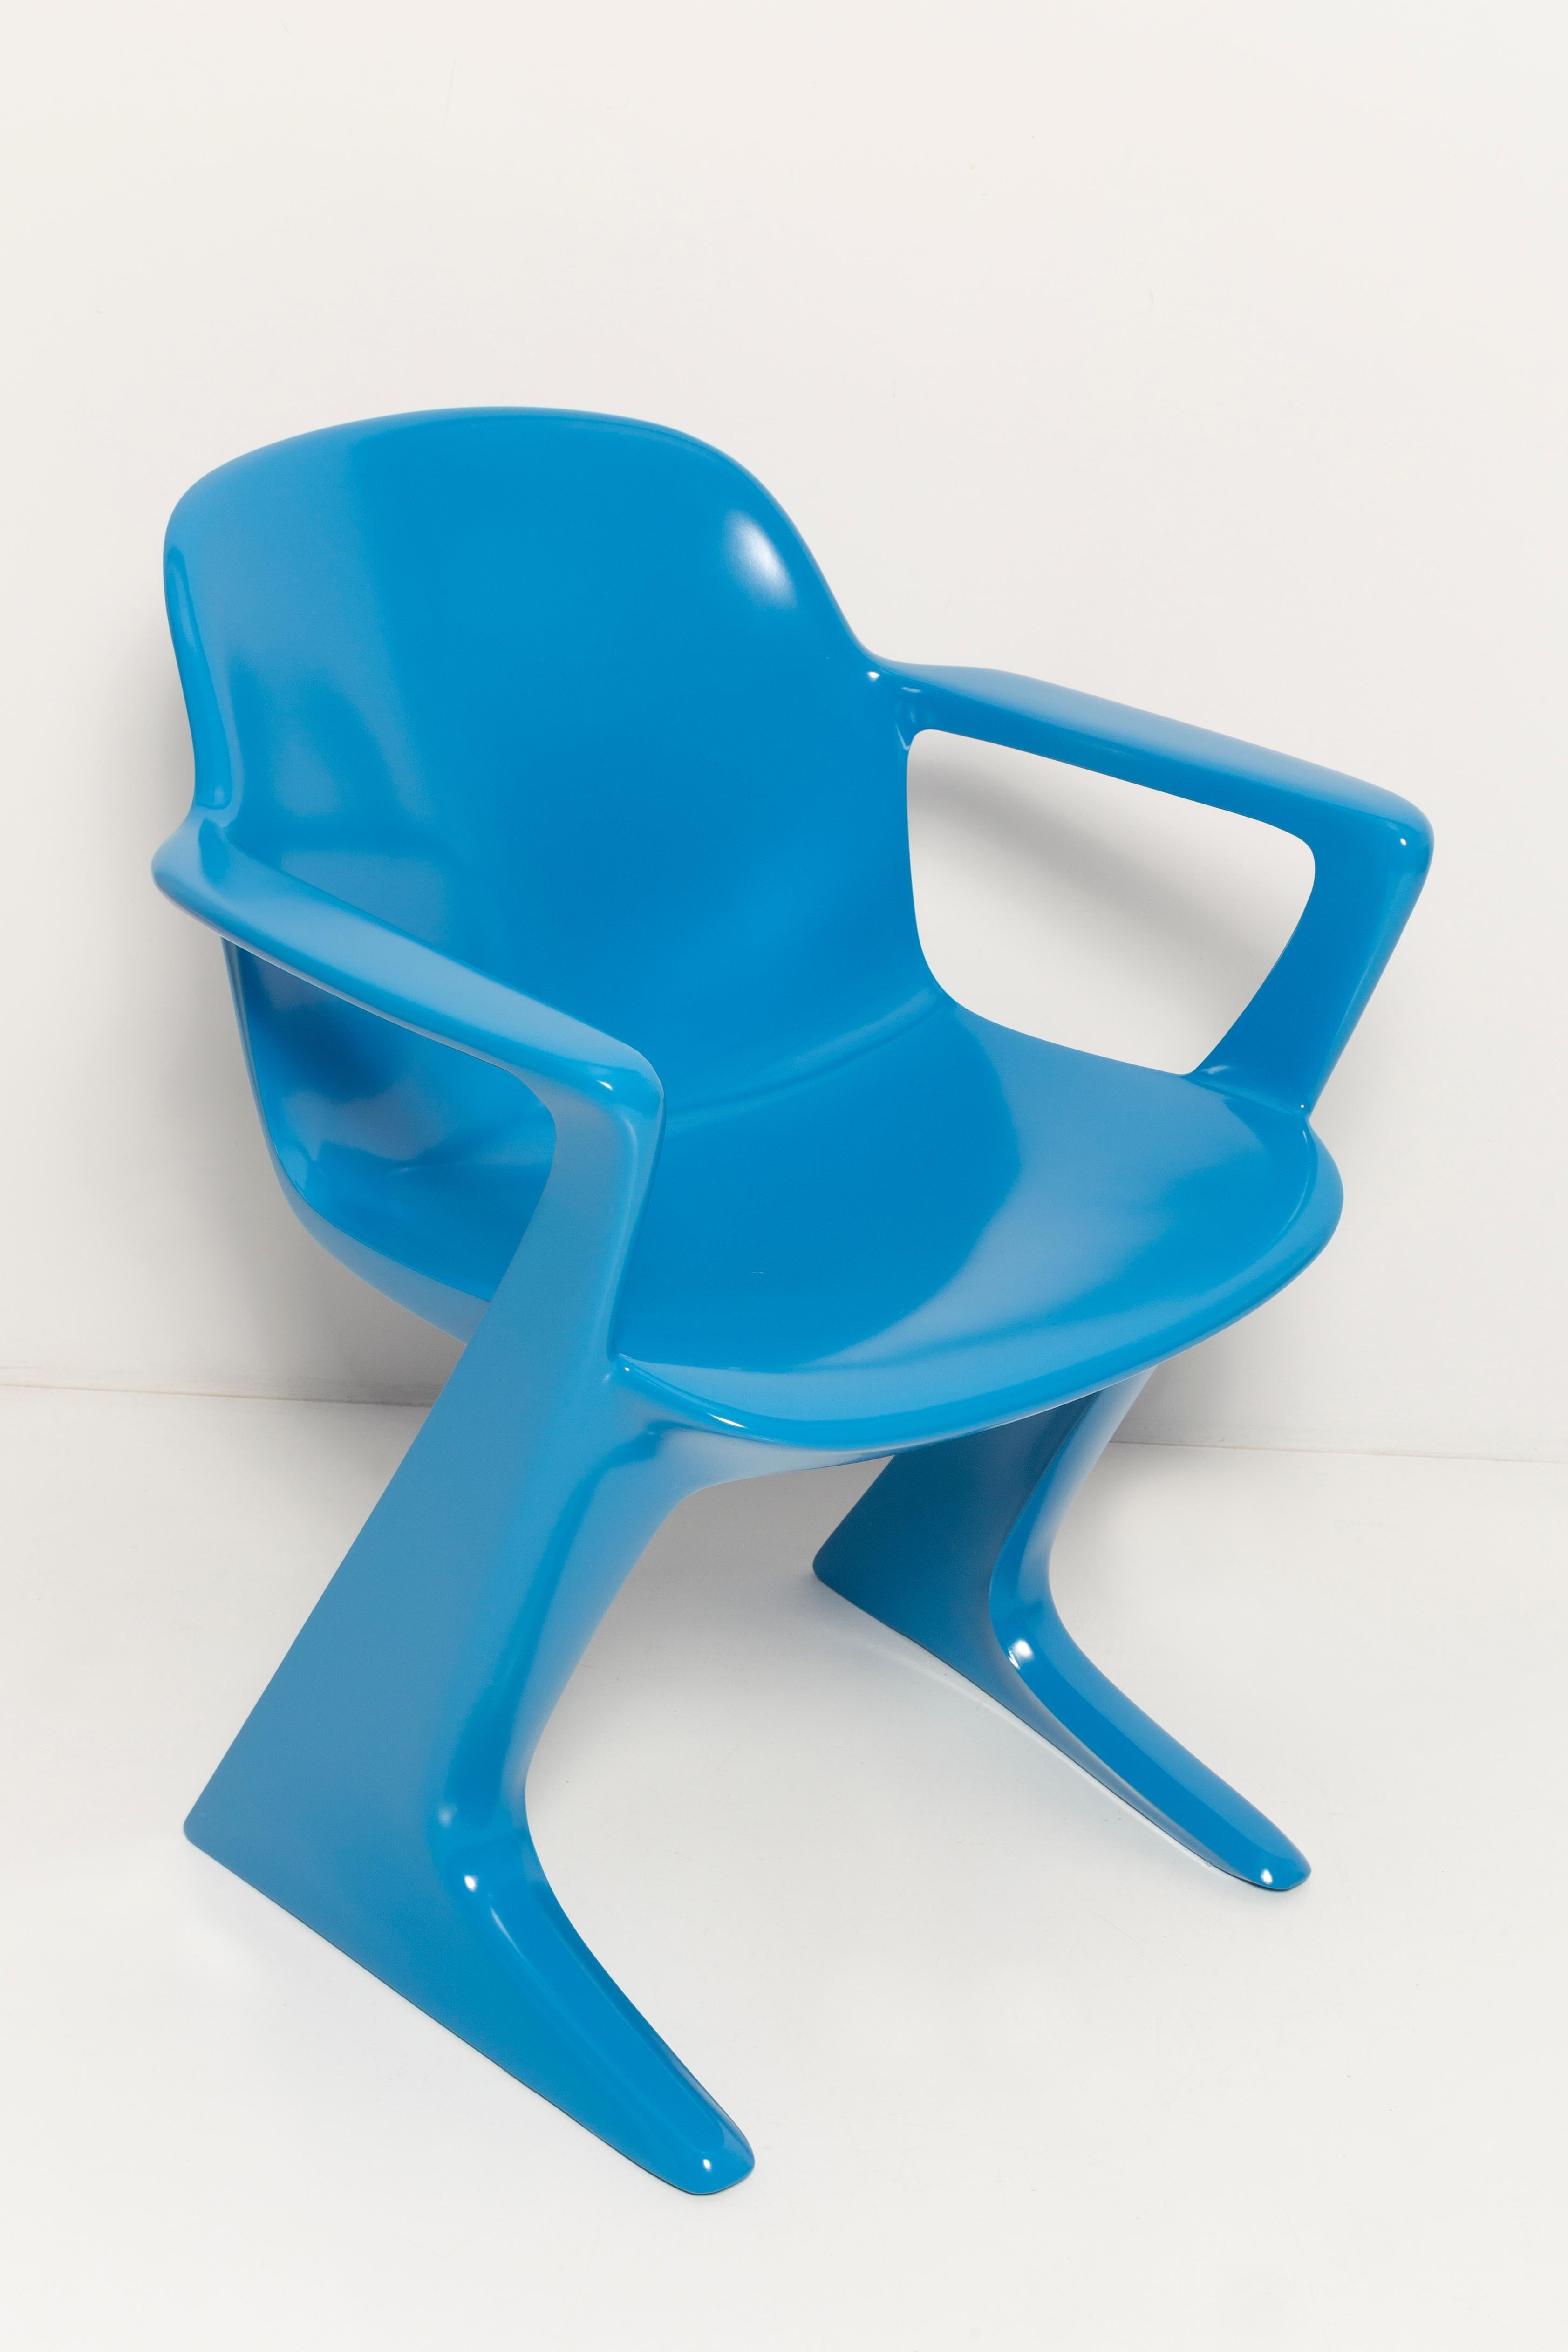 Blue Kangaroo Chair Designed by Ernst Moeckl, Germany, 1968 In Excellent Condition For Sale In 05-080 Hornowek, PL